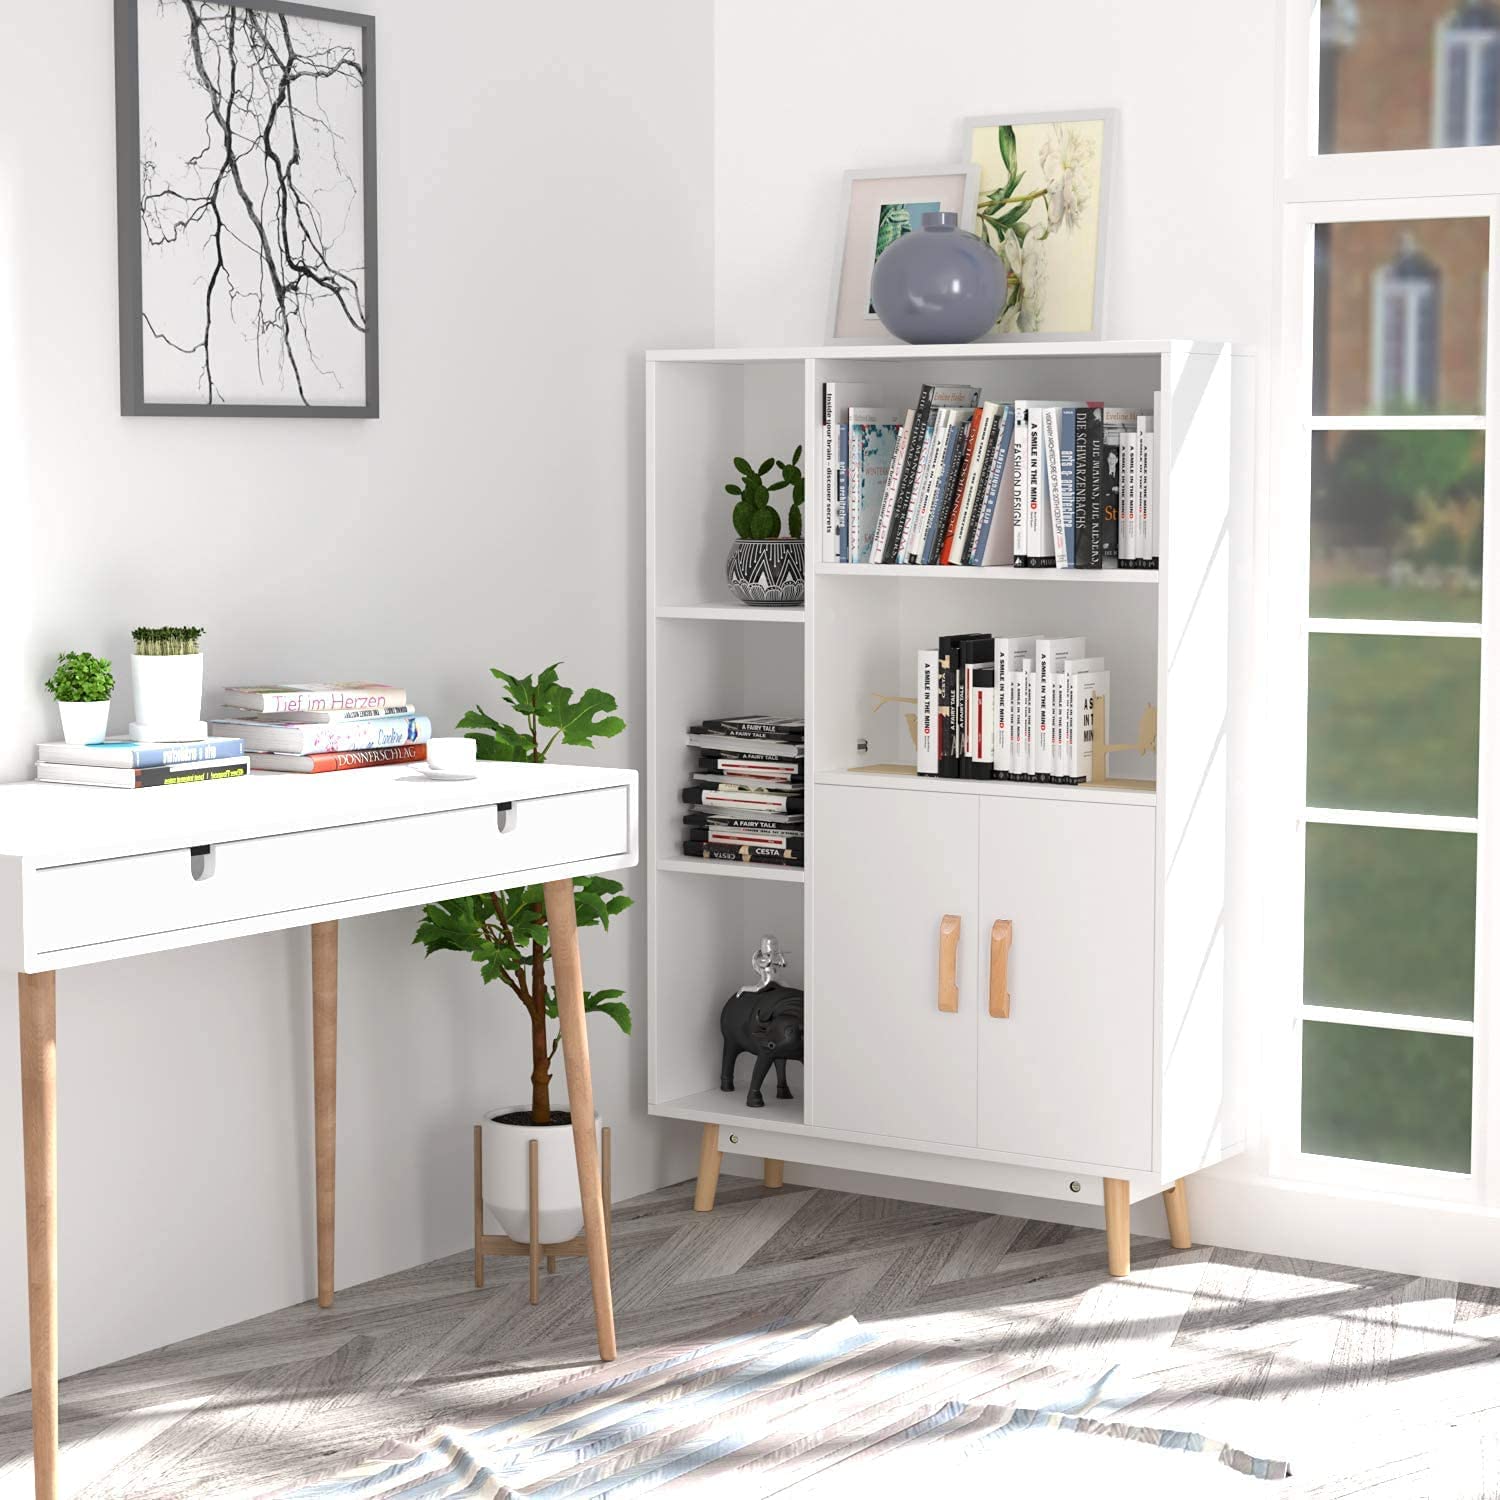 Homfa 5 Cube Bookcase with Door, Open Shelves Free Standing Storage Cabinet with Solid Legs, White Finish - image 2 of 12